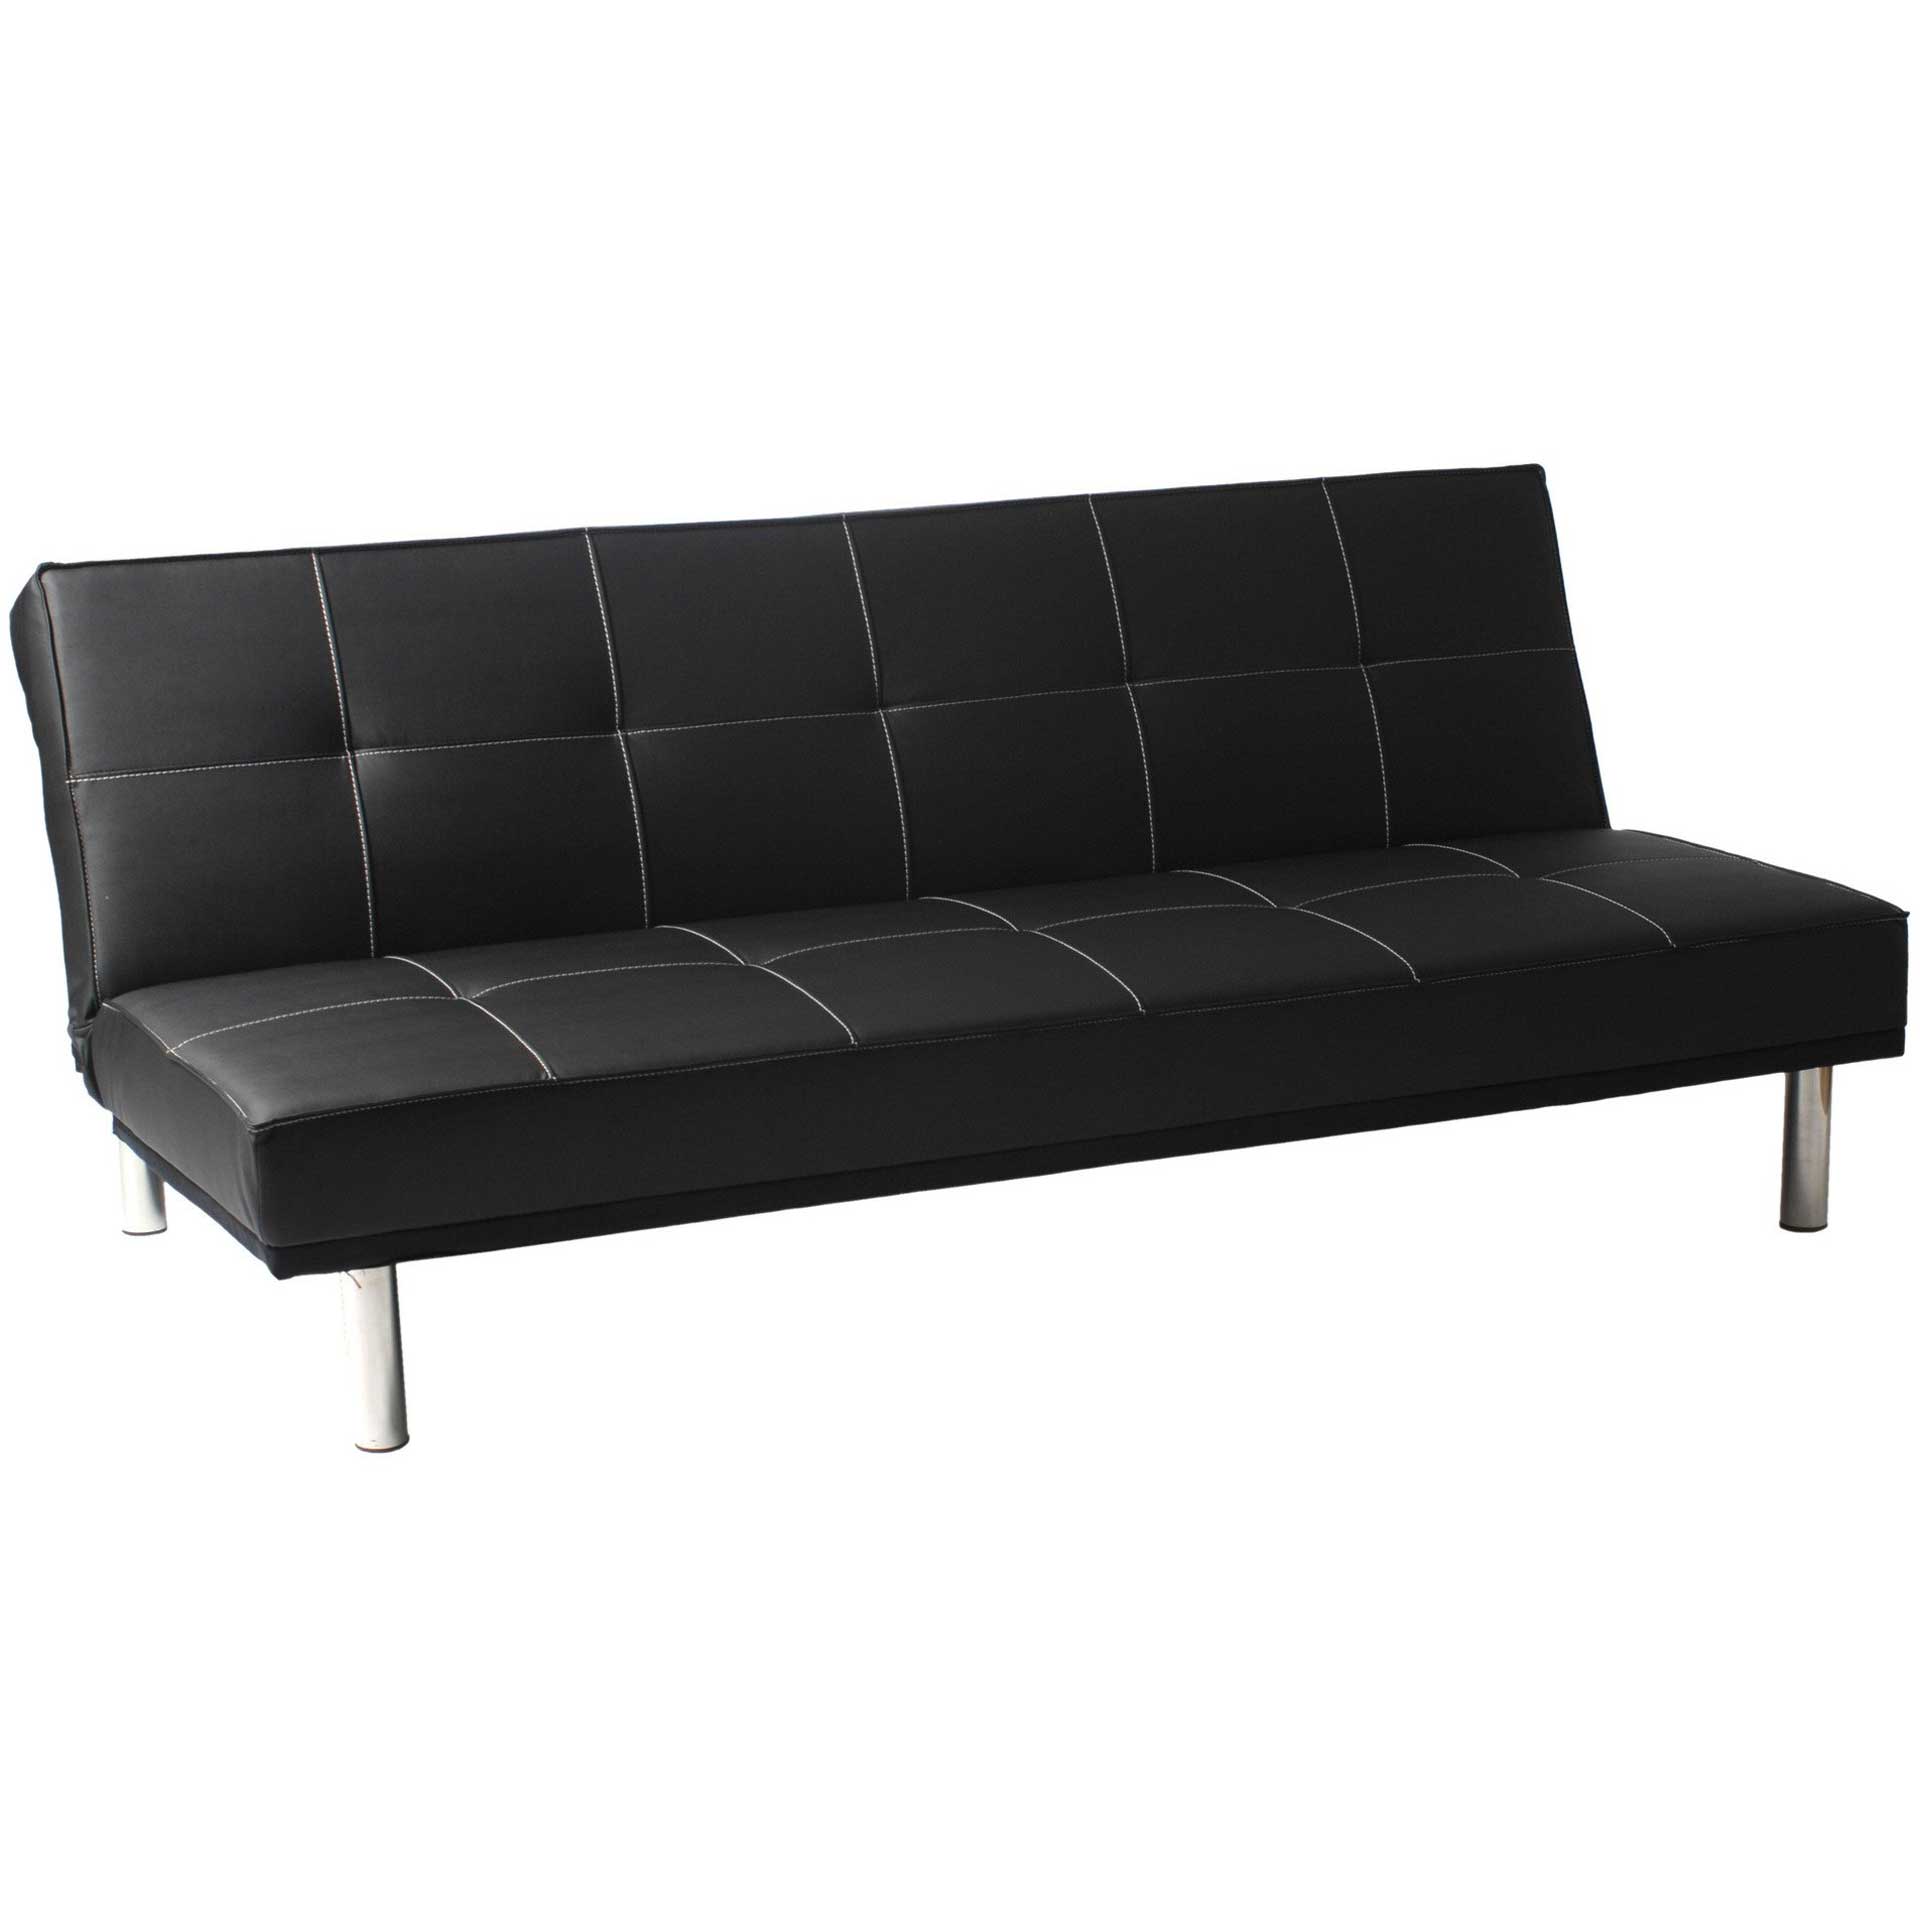 Sev Sofa Bed Black Leatherette/Stainless Steel